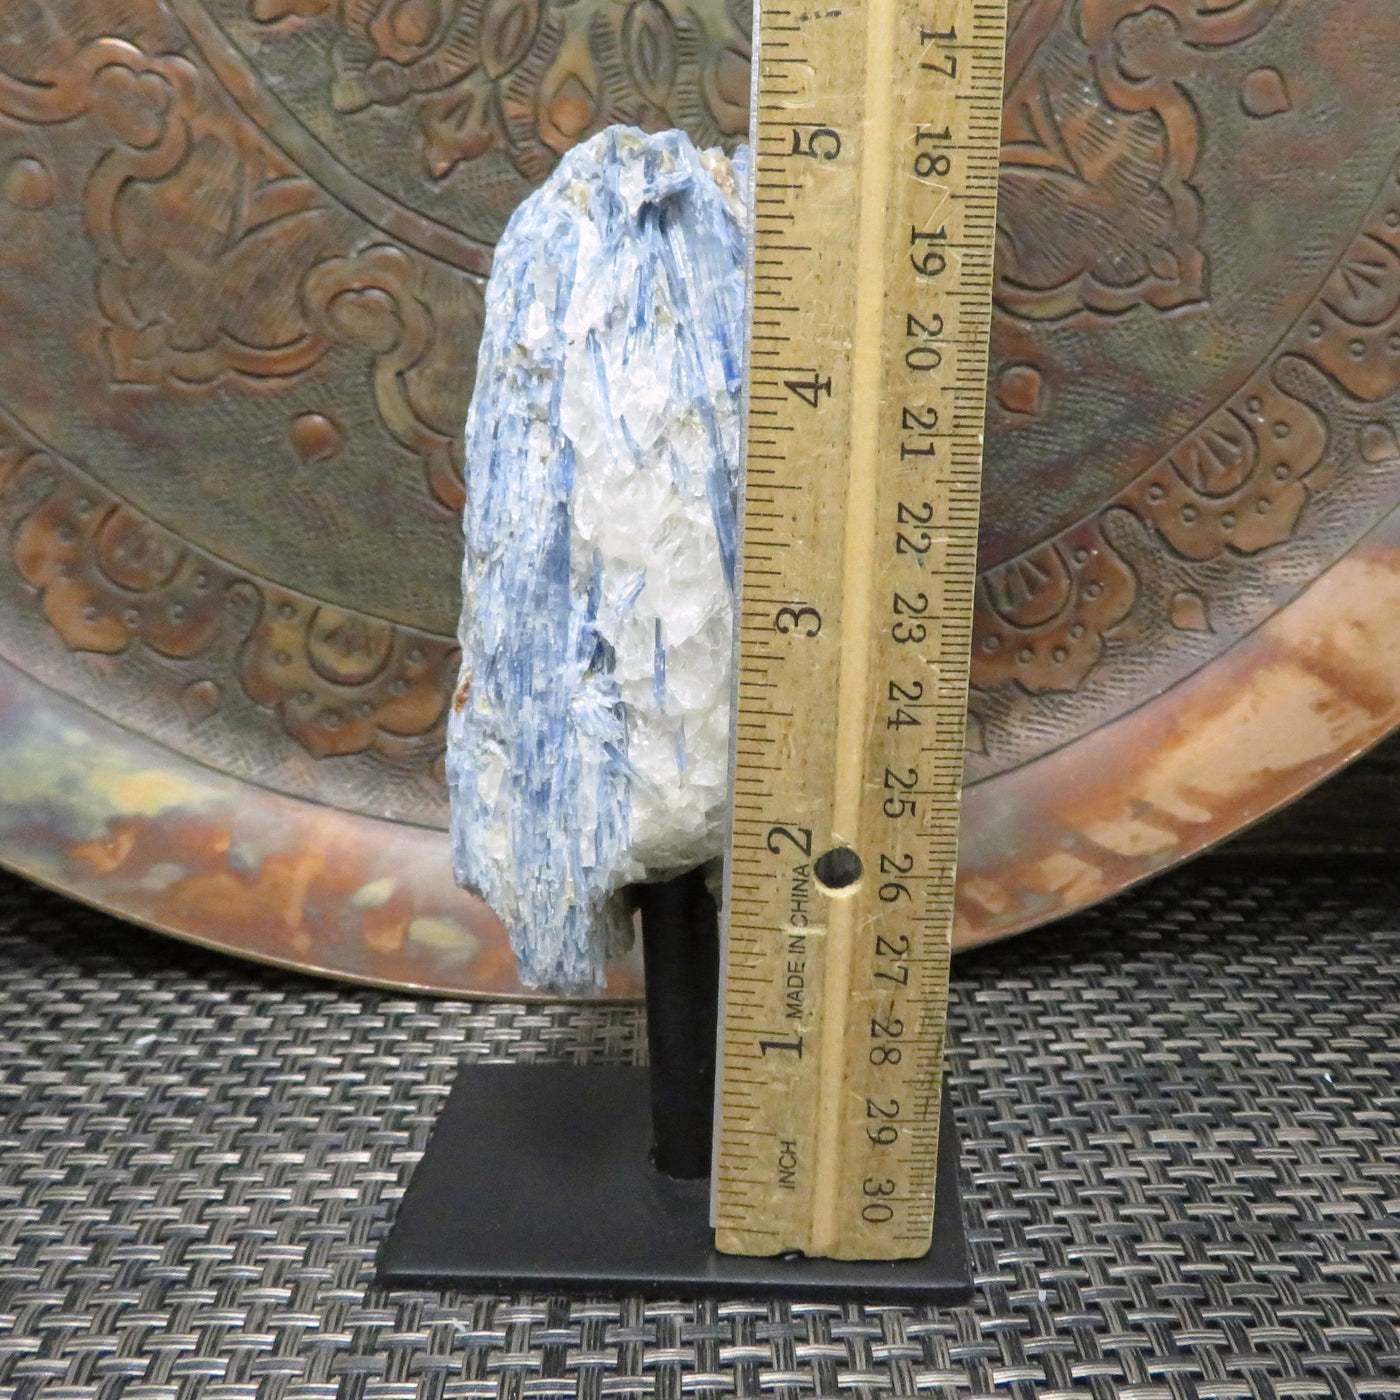 Blue Kyanite on Metal Stand with a ruler for size reference